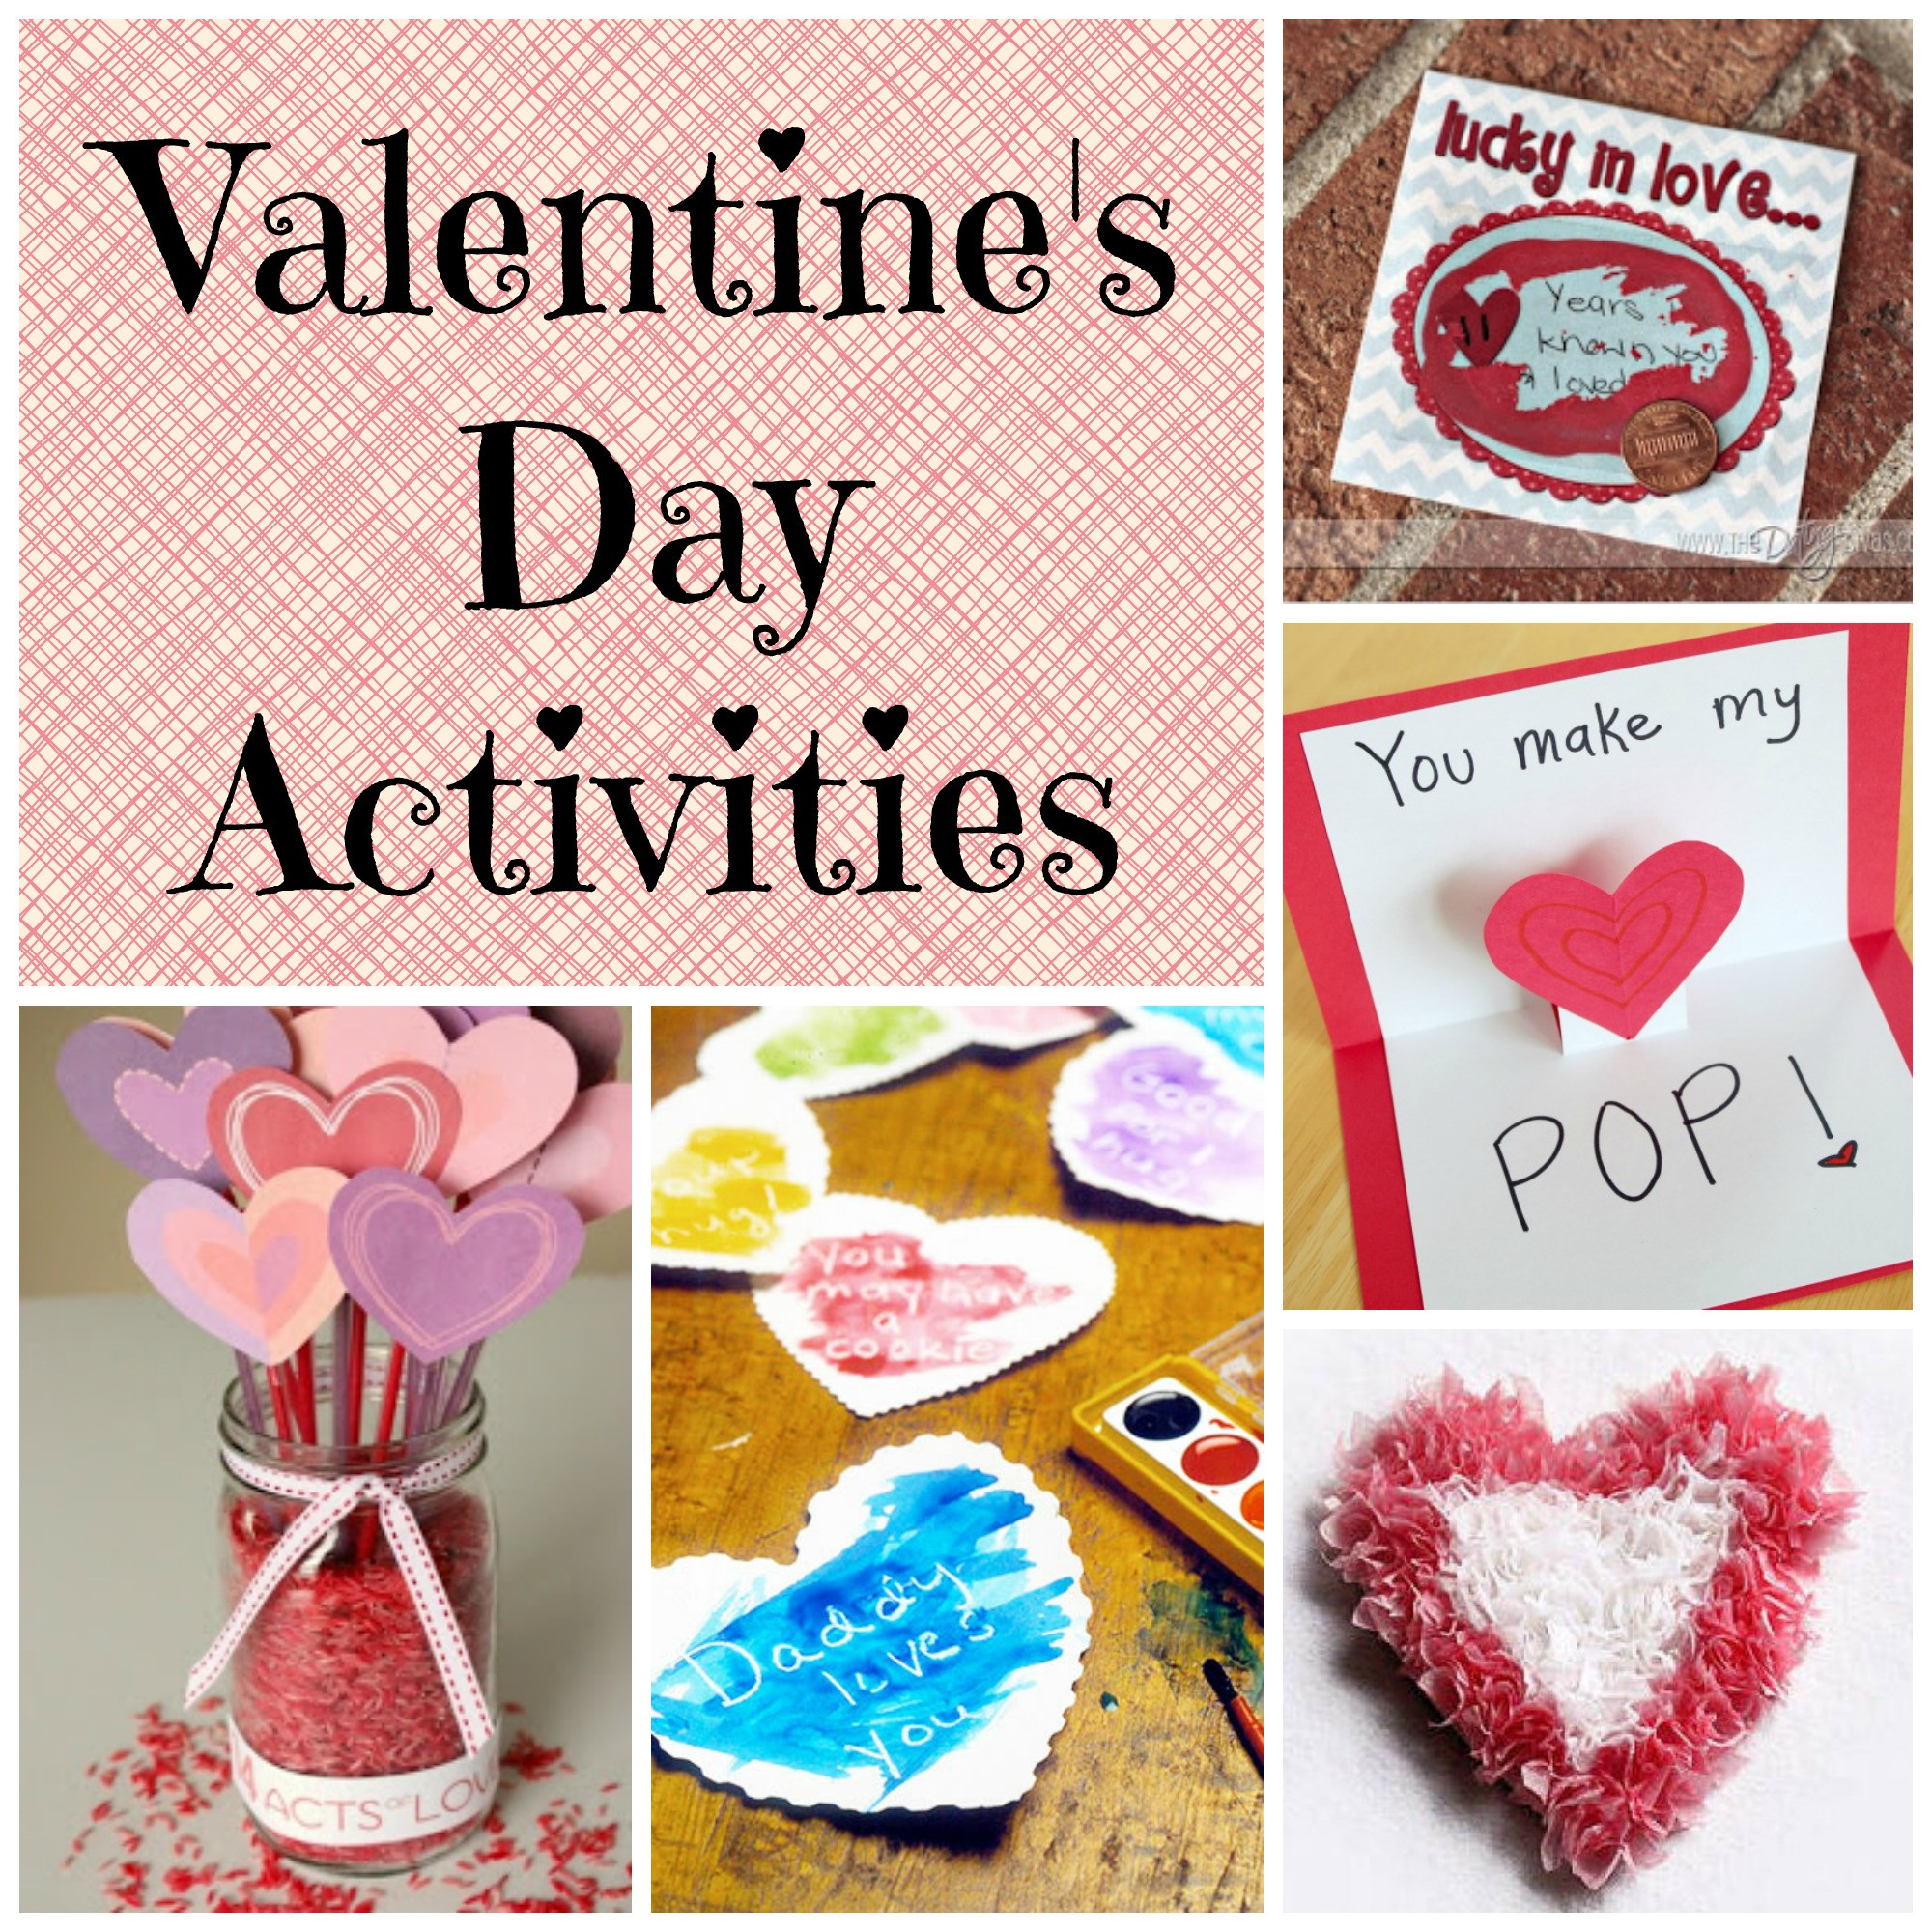 Valentines Day Activities
 Frugal Ideas Archives Saving Cent by Cent